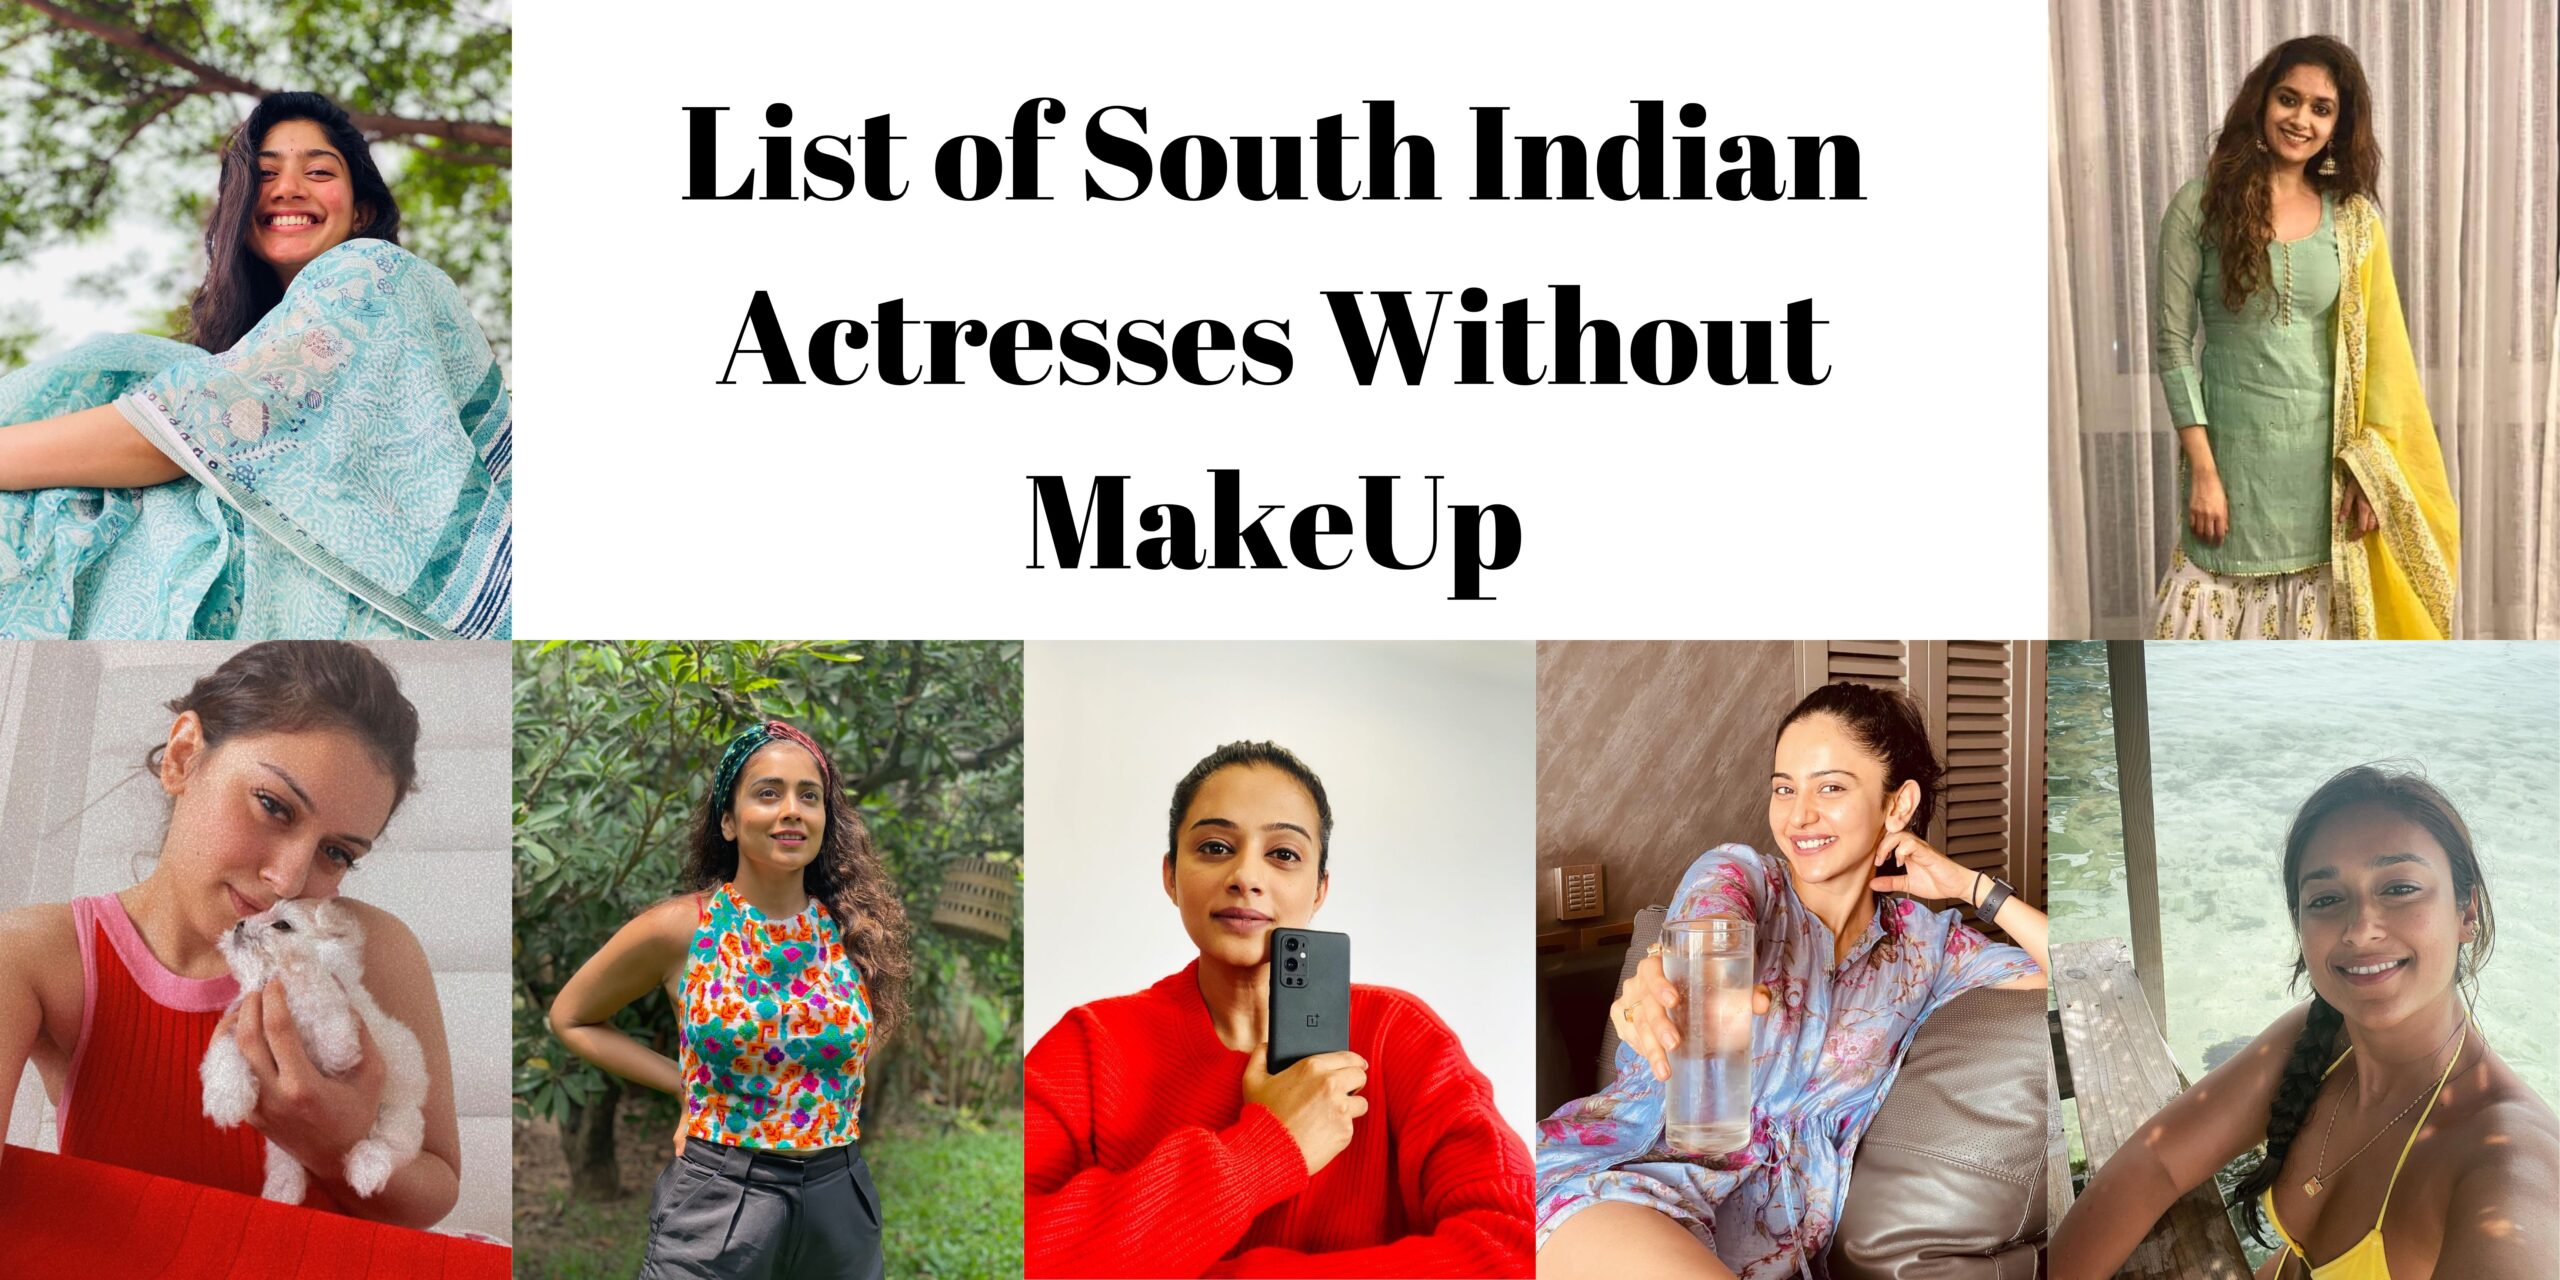 List of South Indian Actresses Without MakeUp